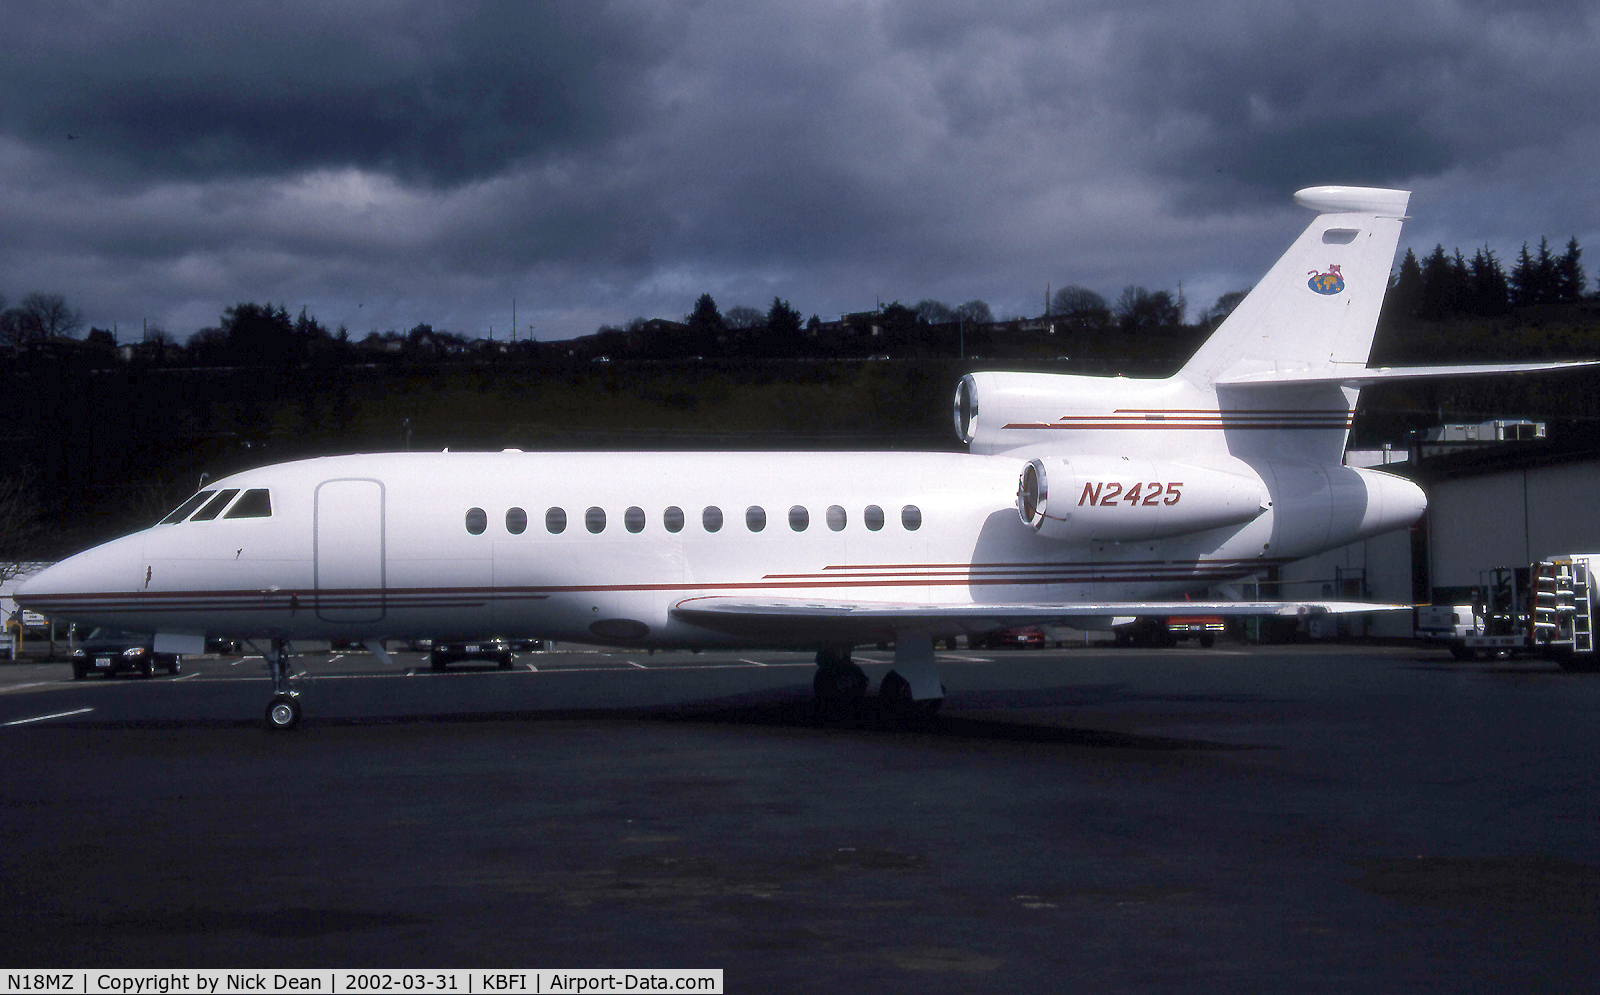 N18MZ, 1987 Dassault Falcon 900 C/N 32, Seen here on this occasion as N2425 also shot as NioMZ but uploaded as N18MZ the current registration